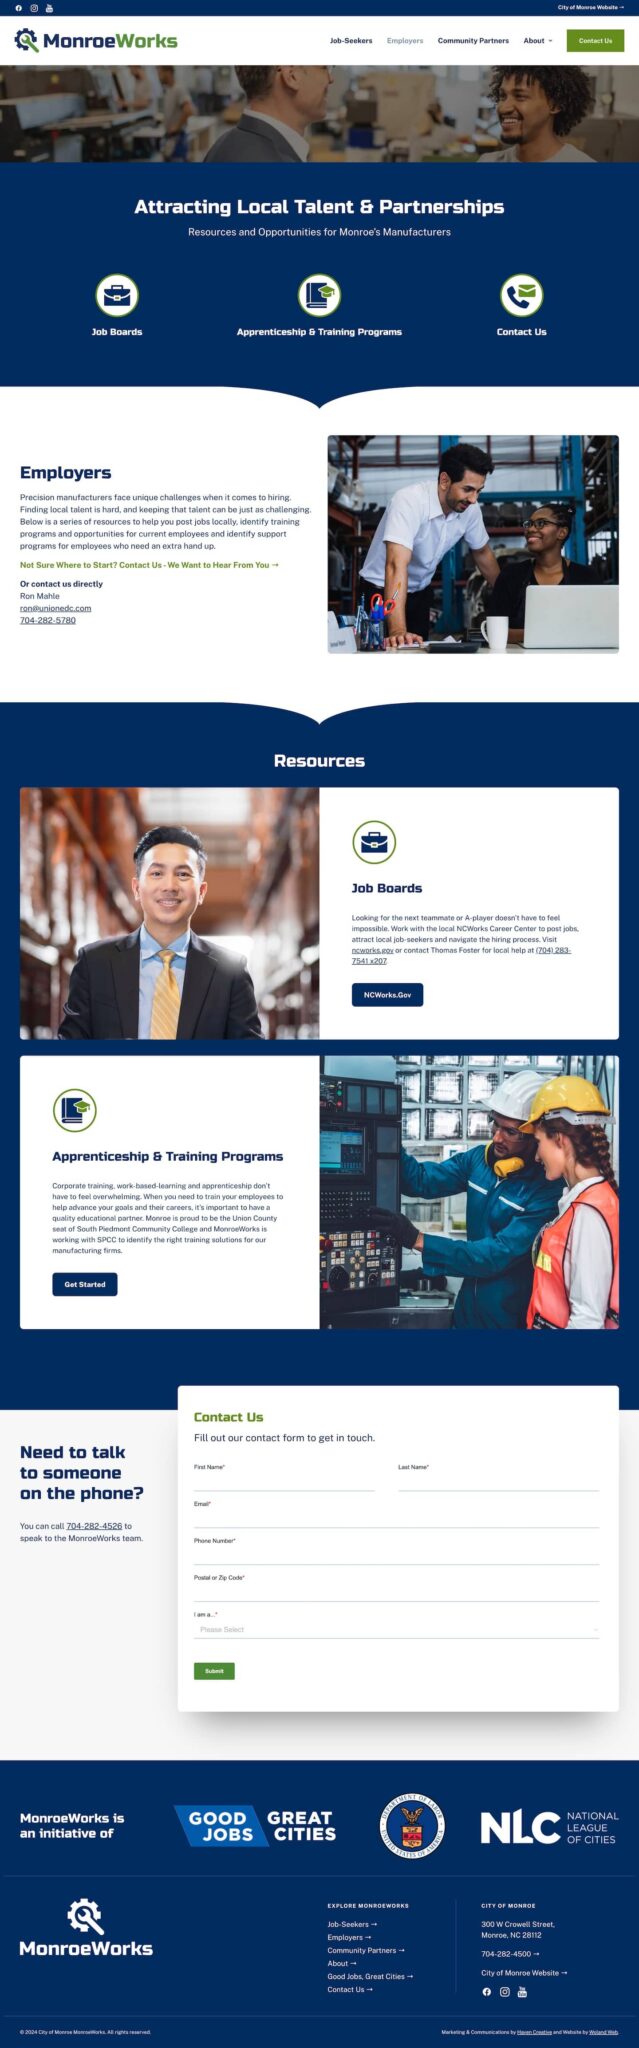 MonroeWorks website employers page